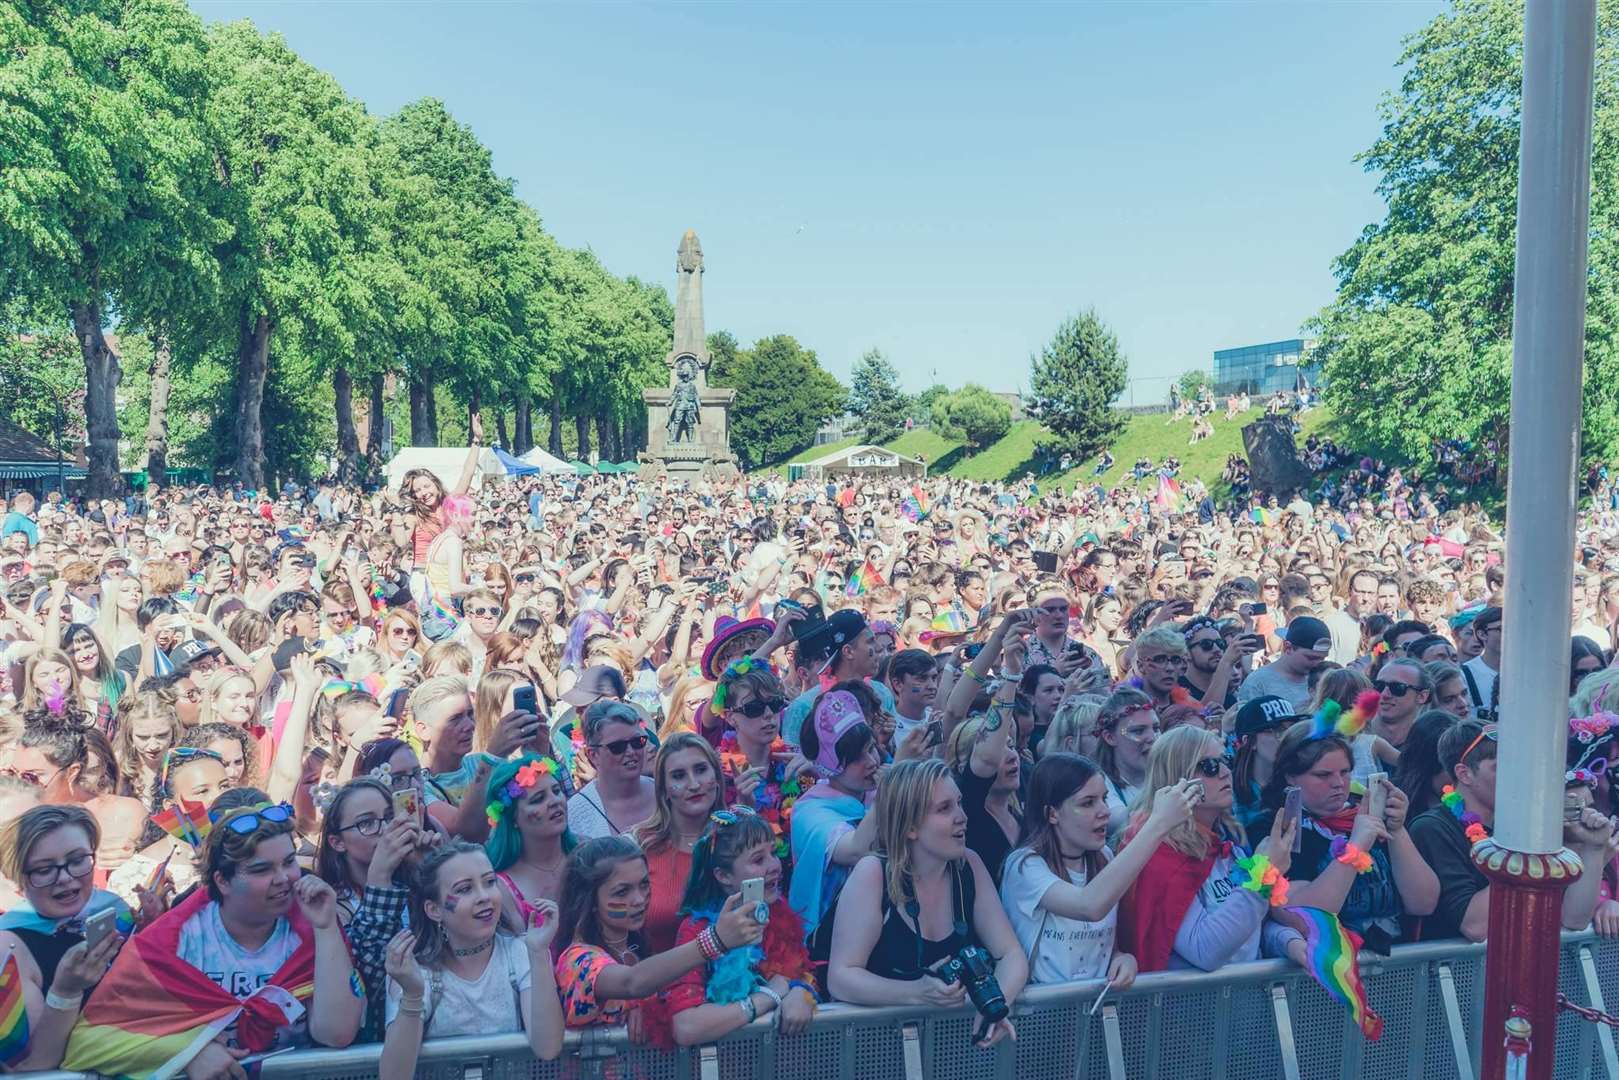 Canterbury Pride at Dane John Gardens has grown in popularity and attracts tens of thousands to the city